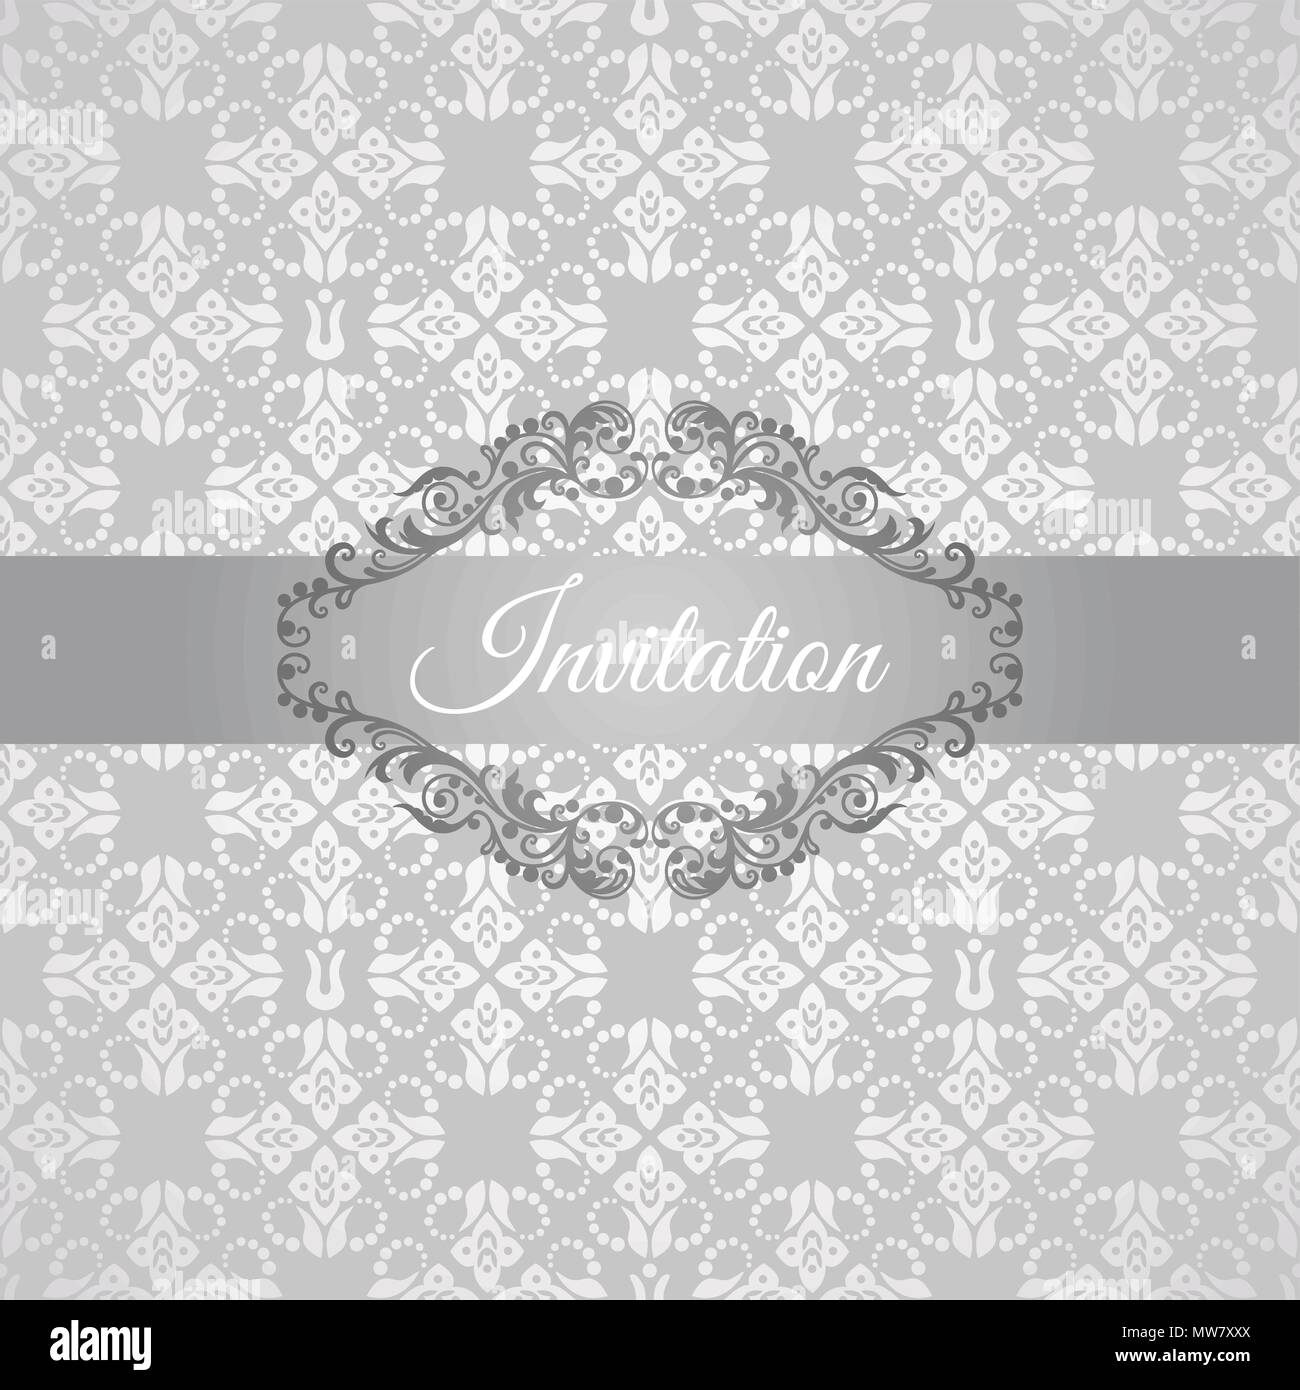 Silver floral invitation with a floral frame. This image is a vector illustration Stock Vector